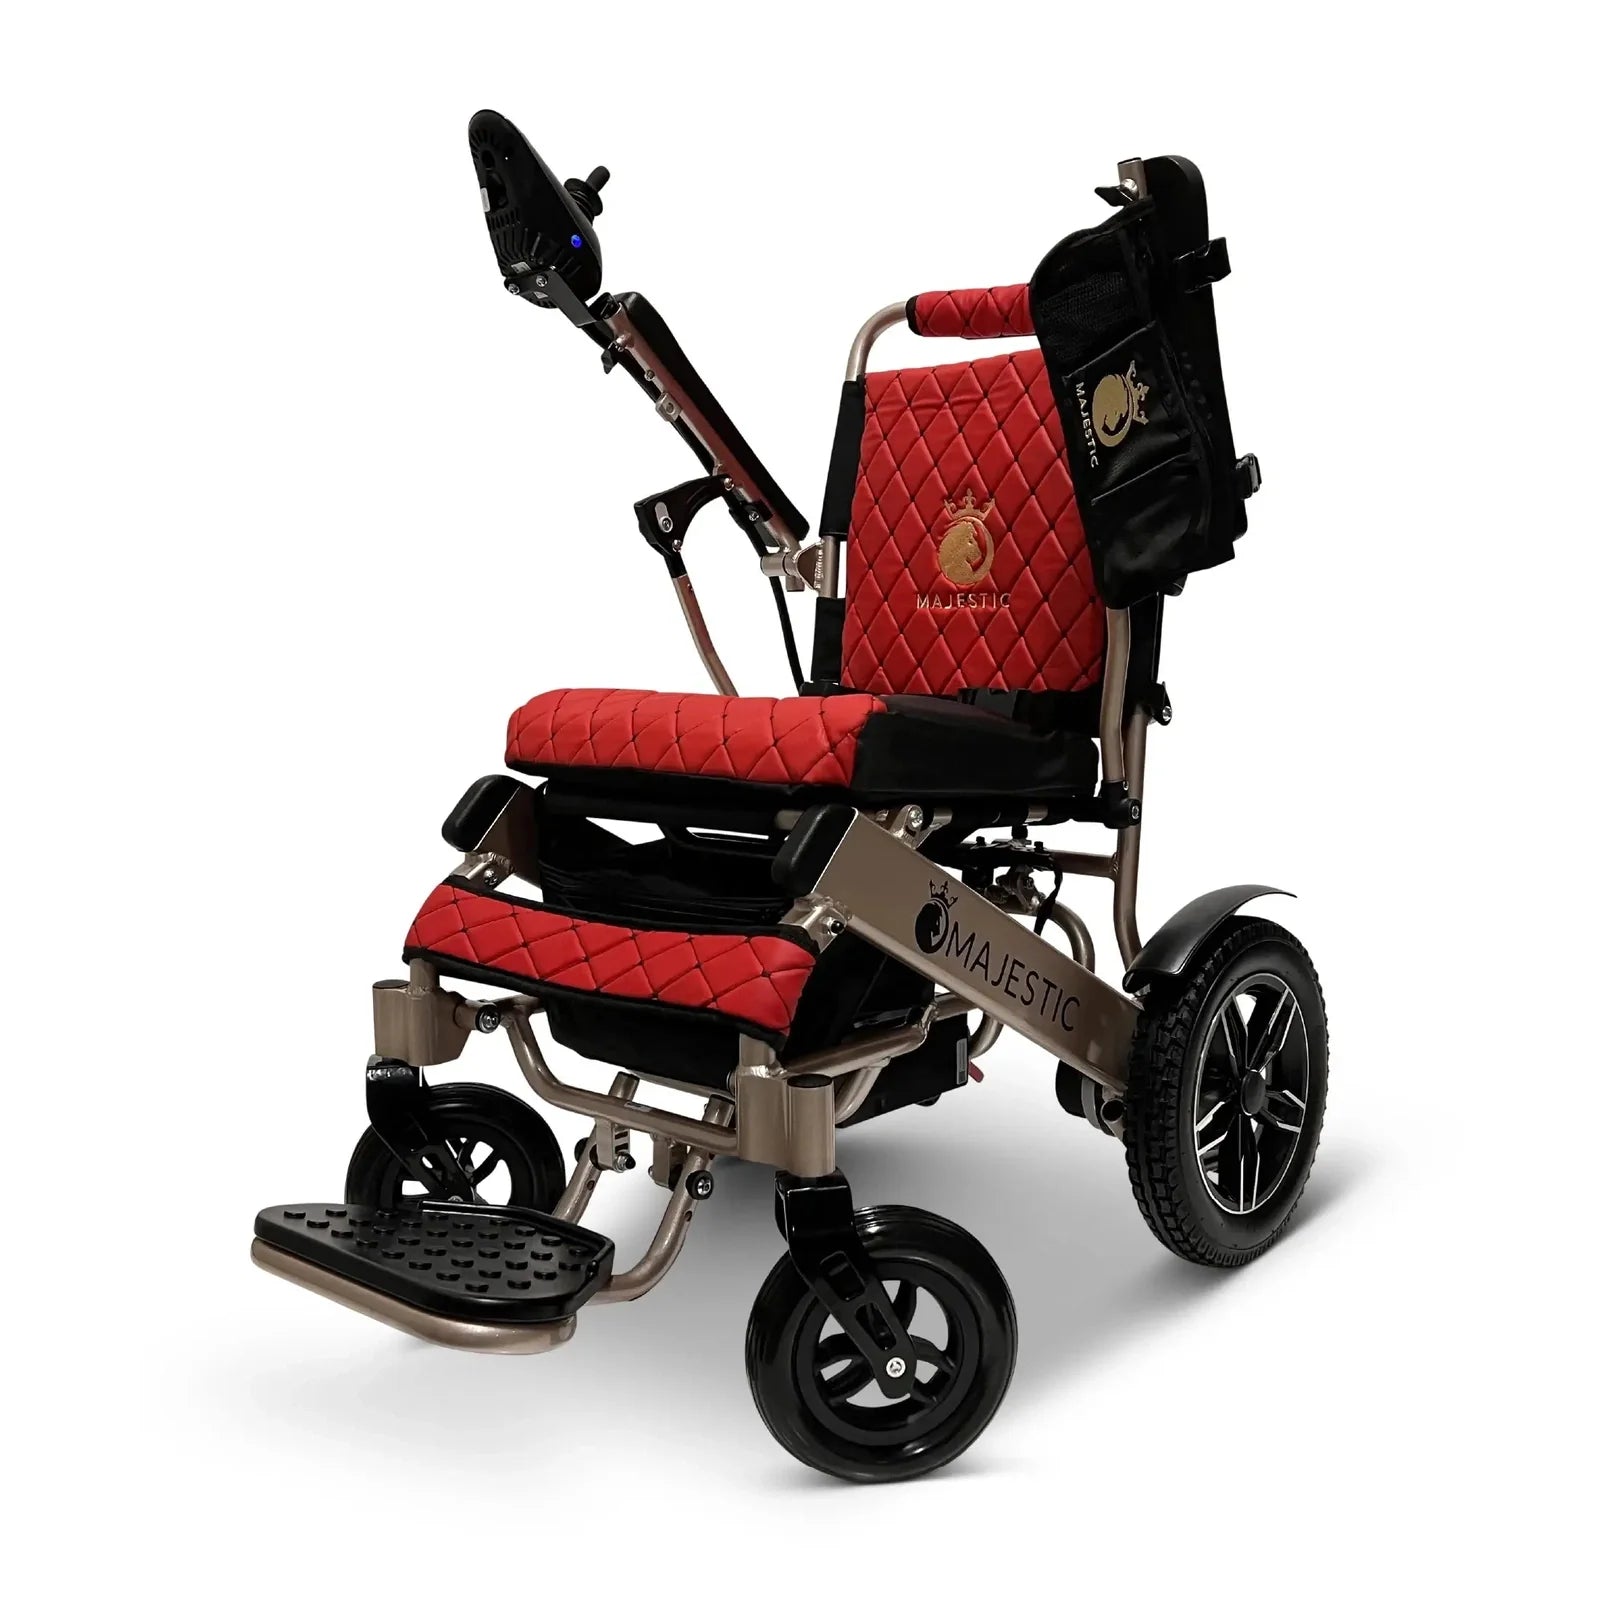 ComfyGO Majestic IQ-8000 Remote Controlled Lightweight Folding Electric Wheelchair Power Wheelchairs ComfyGO Bronze Red 10 Miles & 17.5" Seat Width